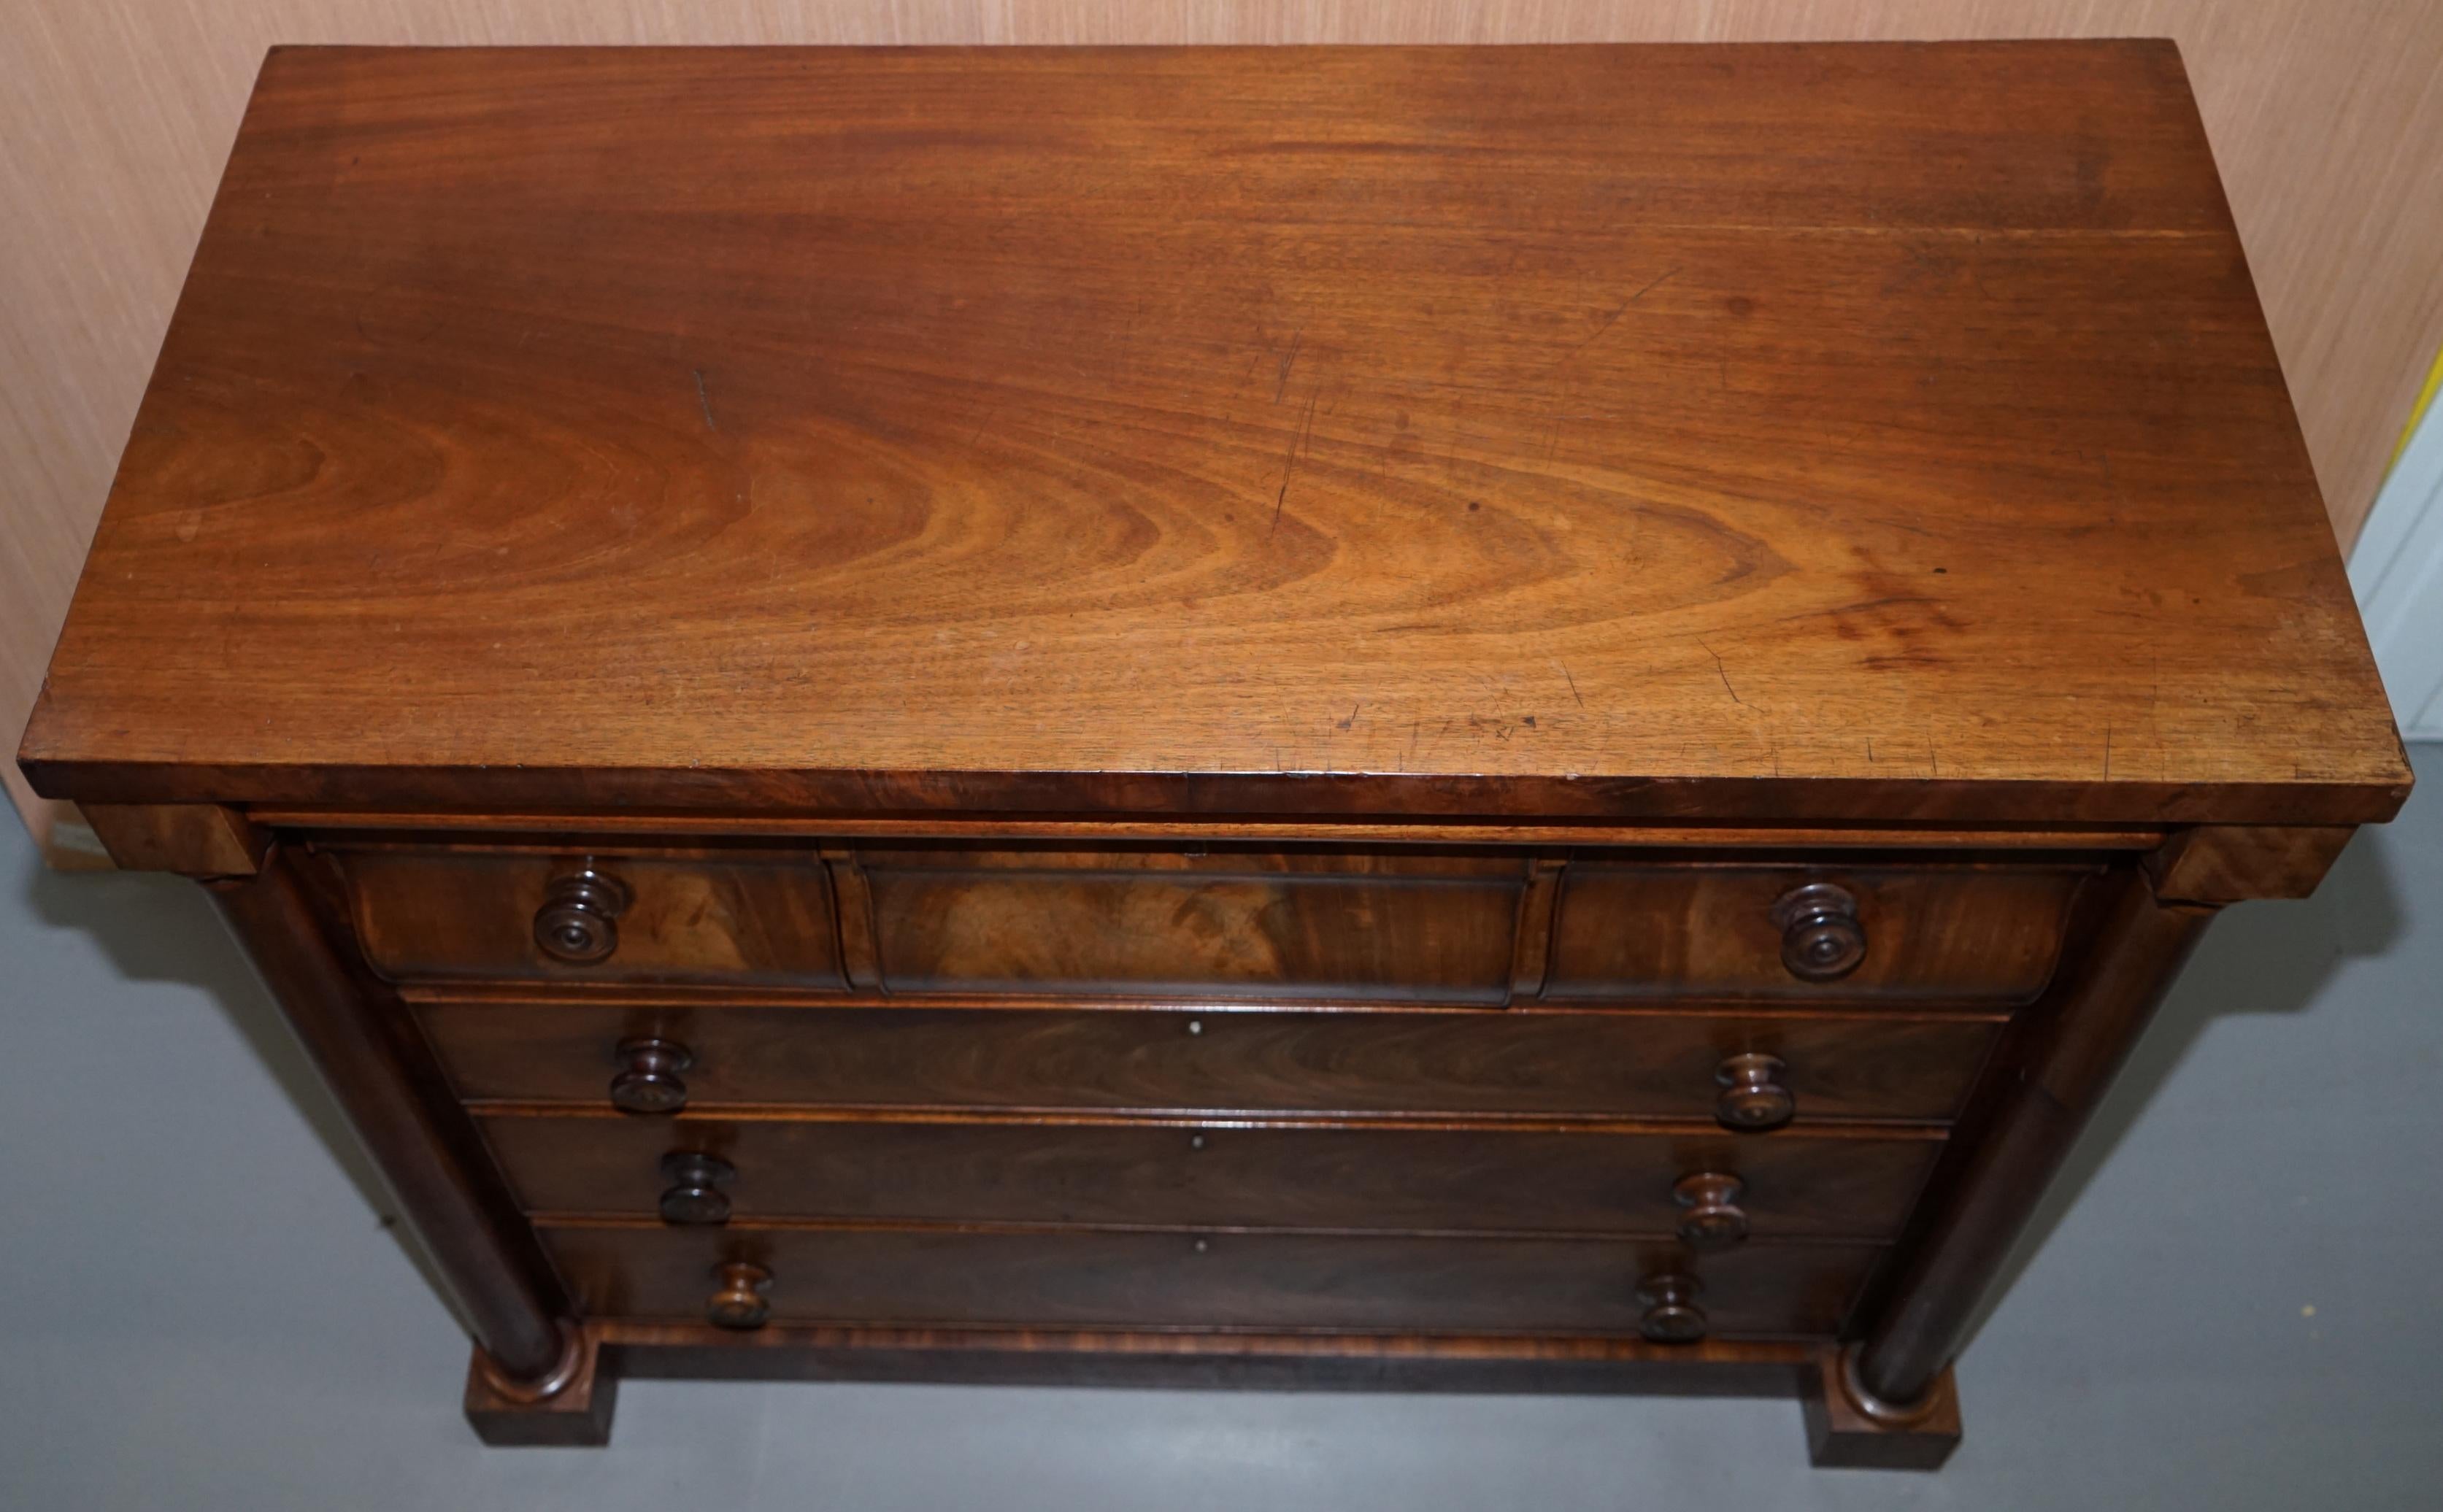 Hand-Crafted Large 19th Century Victorian Flamed Mahogany Chest of Drawers Stunning Timber